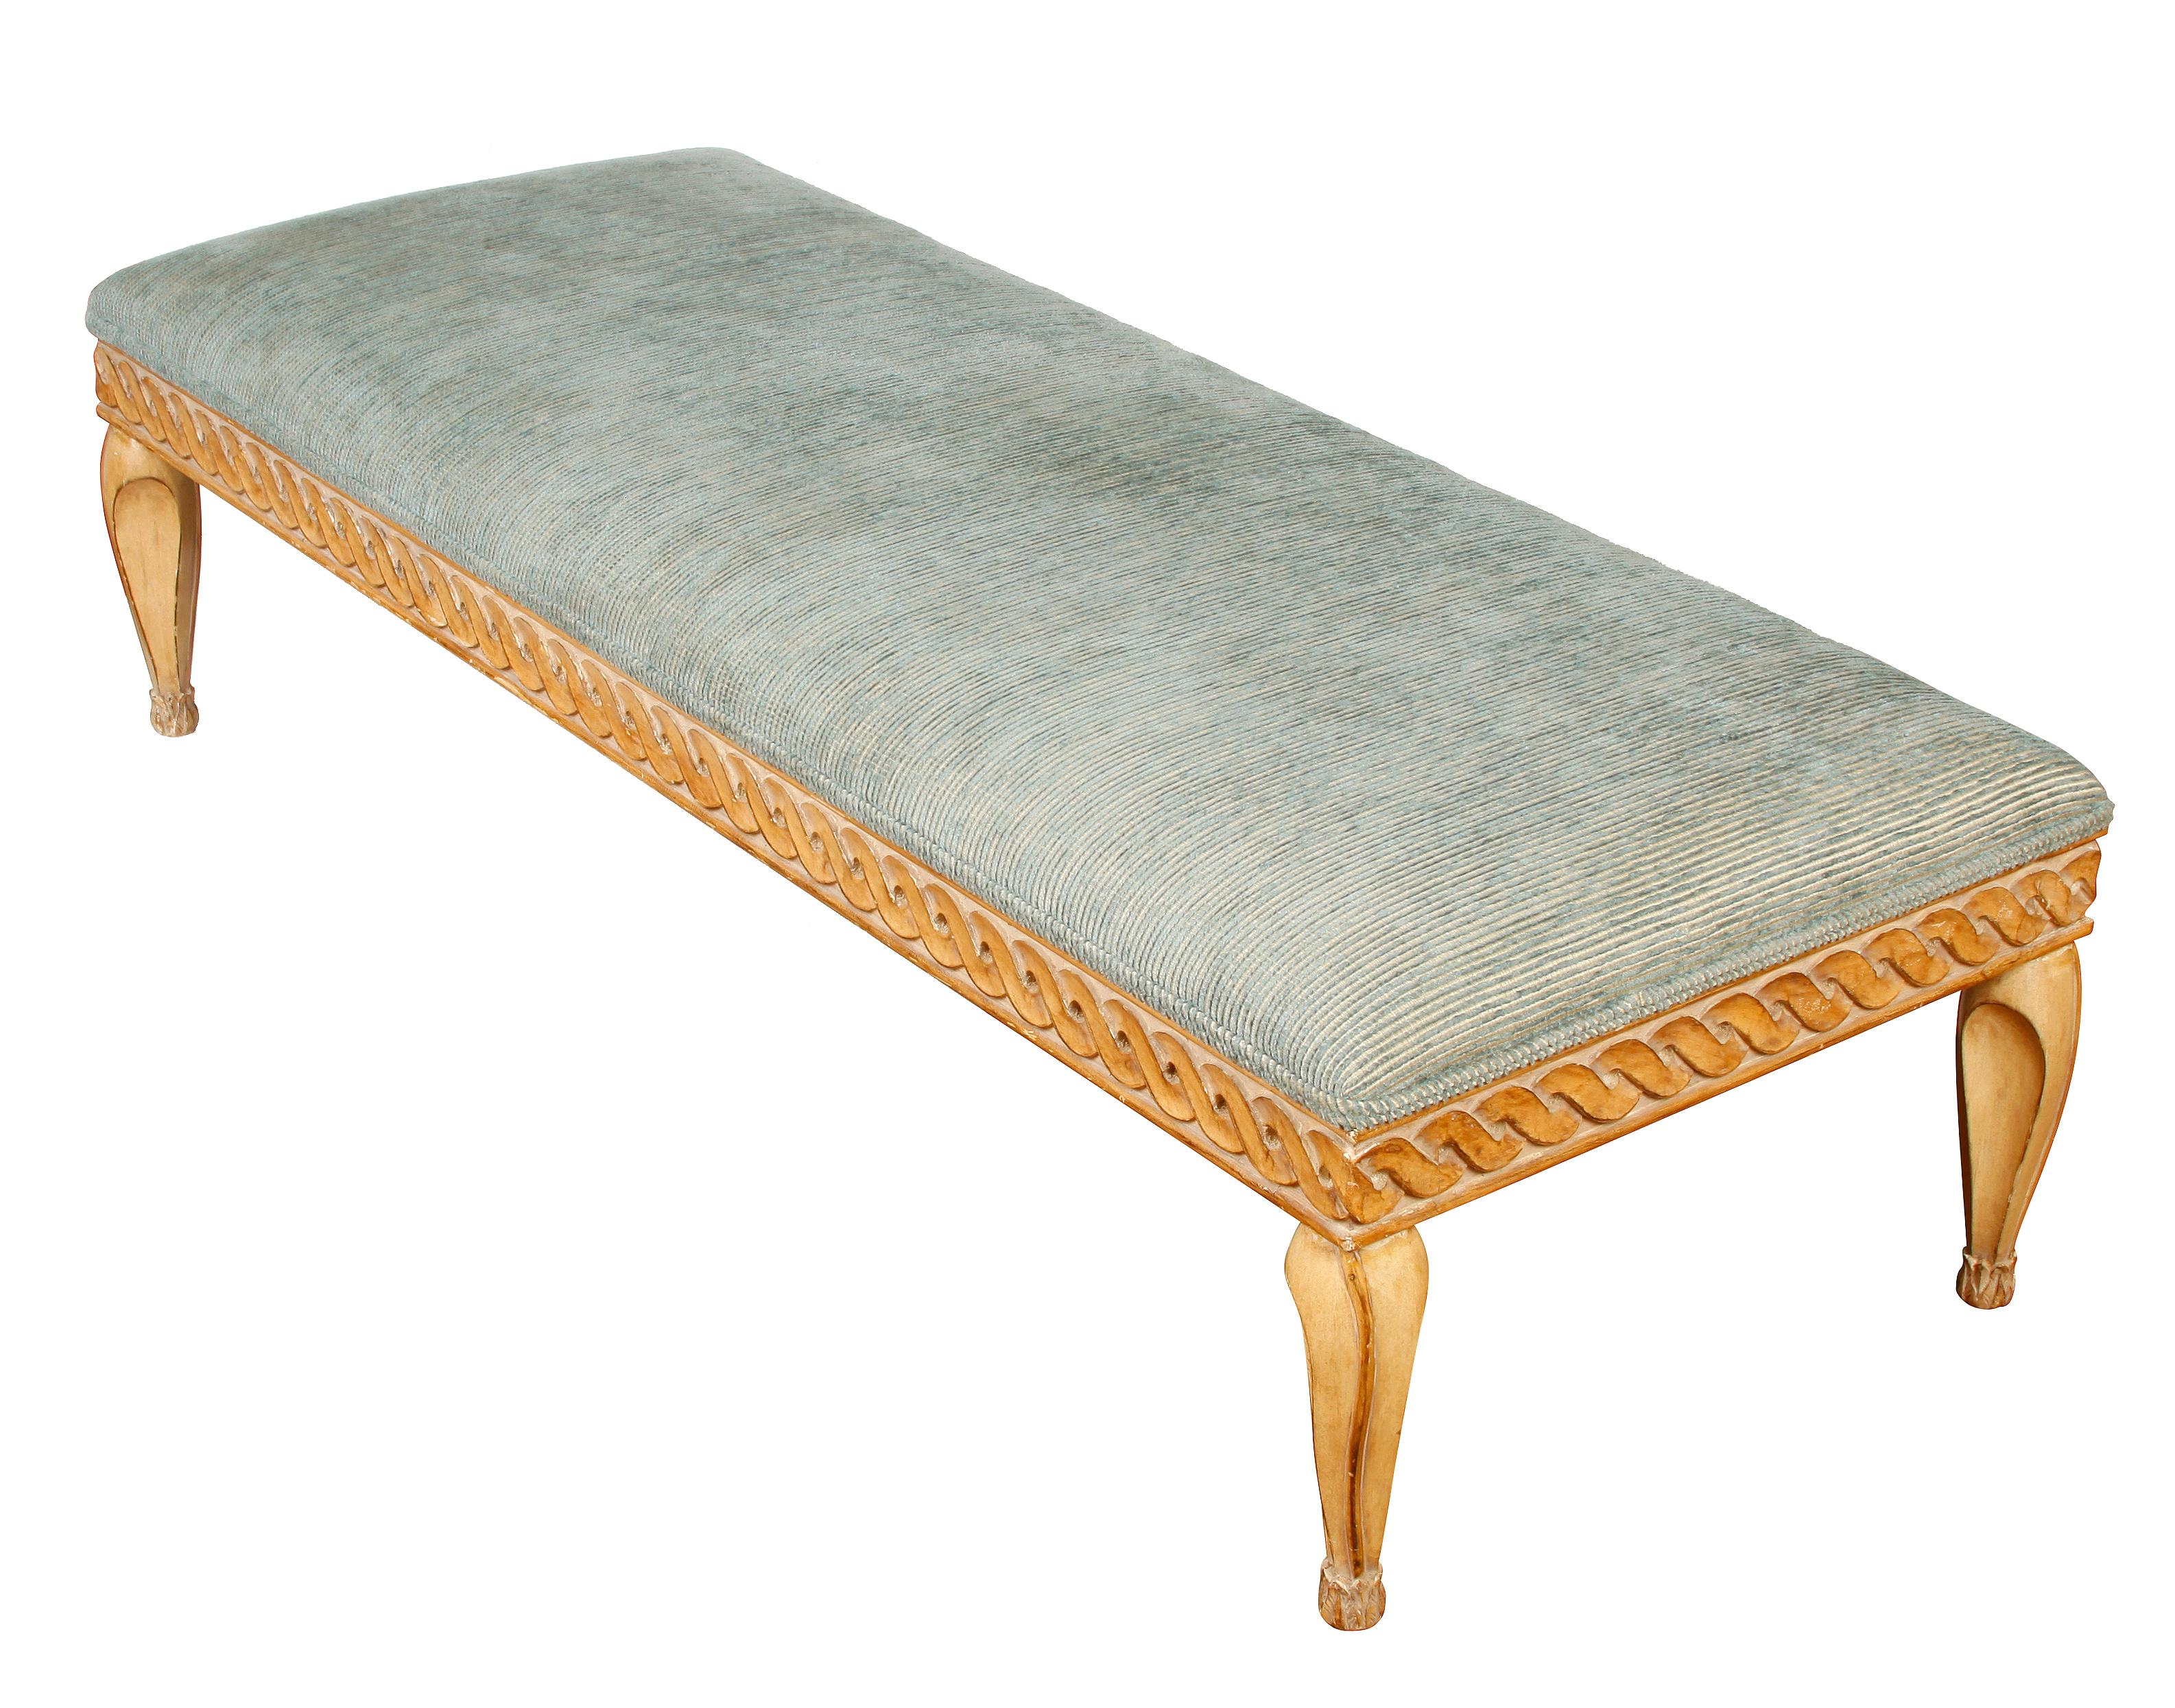 Cerused oak carved wood ottoman with rope trim to the skirt and sculptured legs with capped feet. Ottoman is upholstered in pale blue textured stripe fabric.